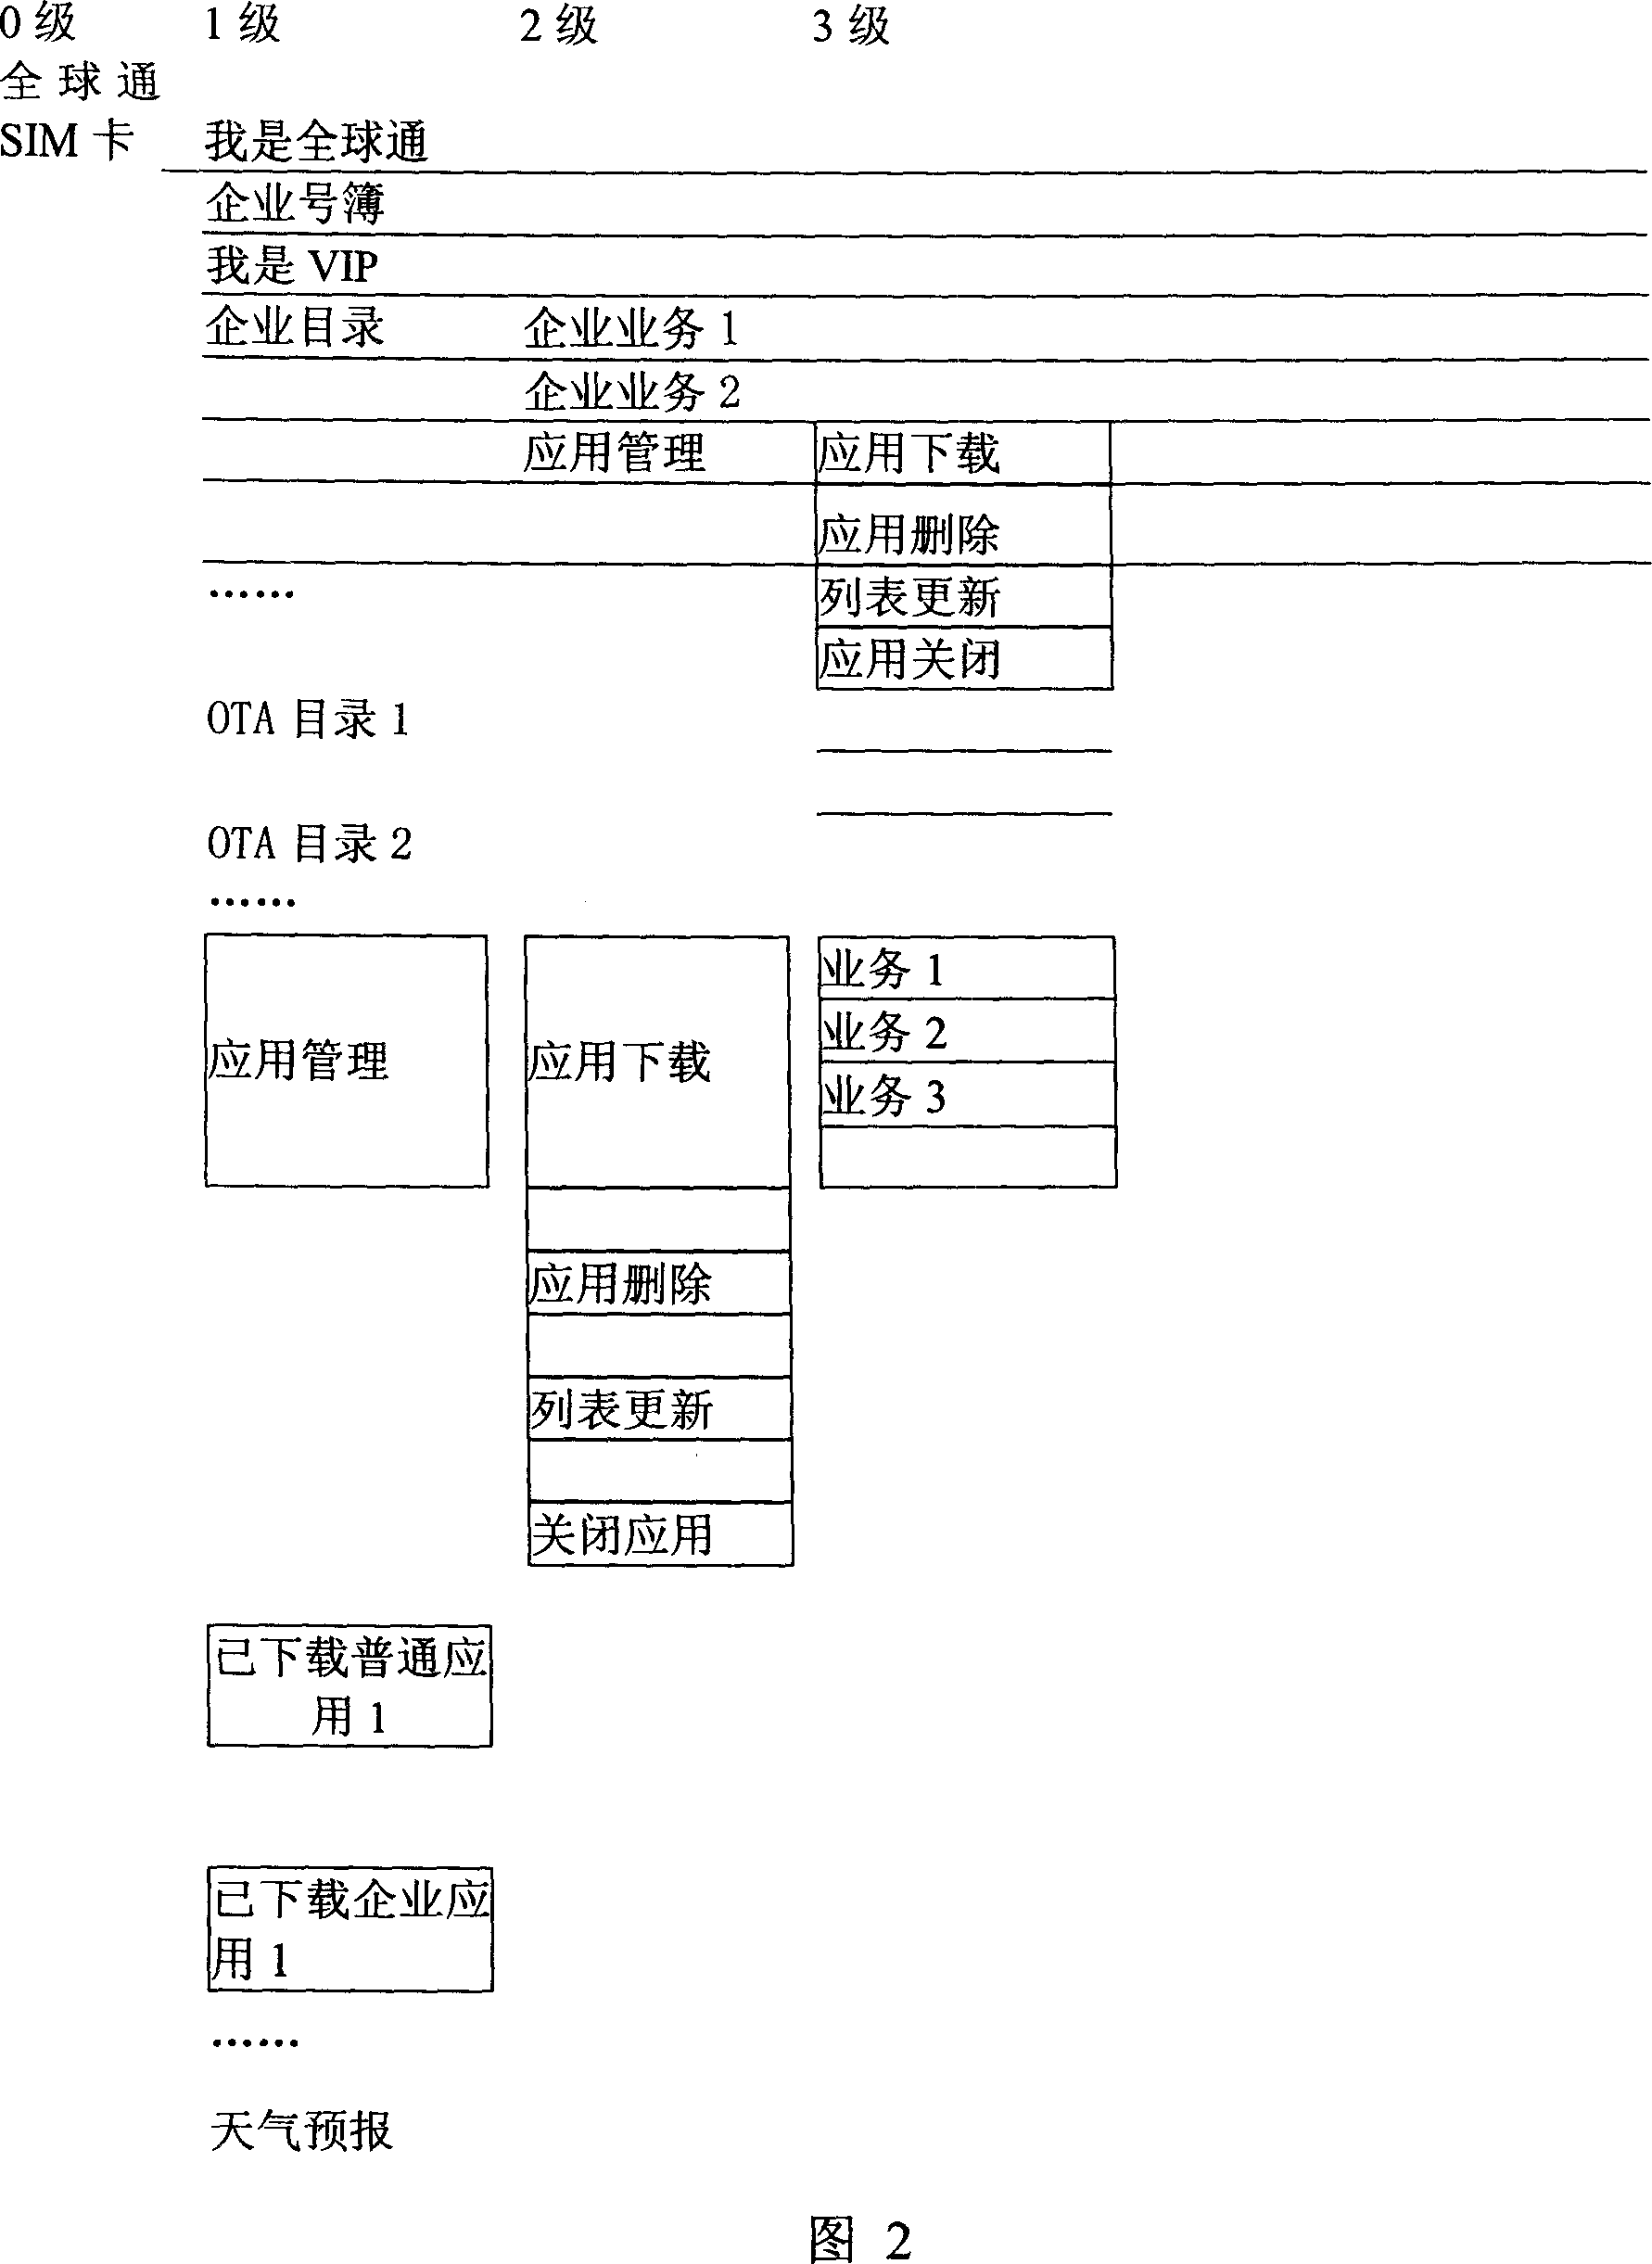 Method for realizing user identifying module service and application for specific group users